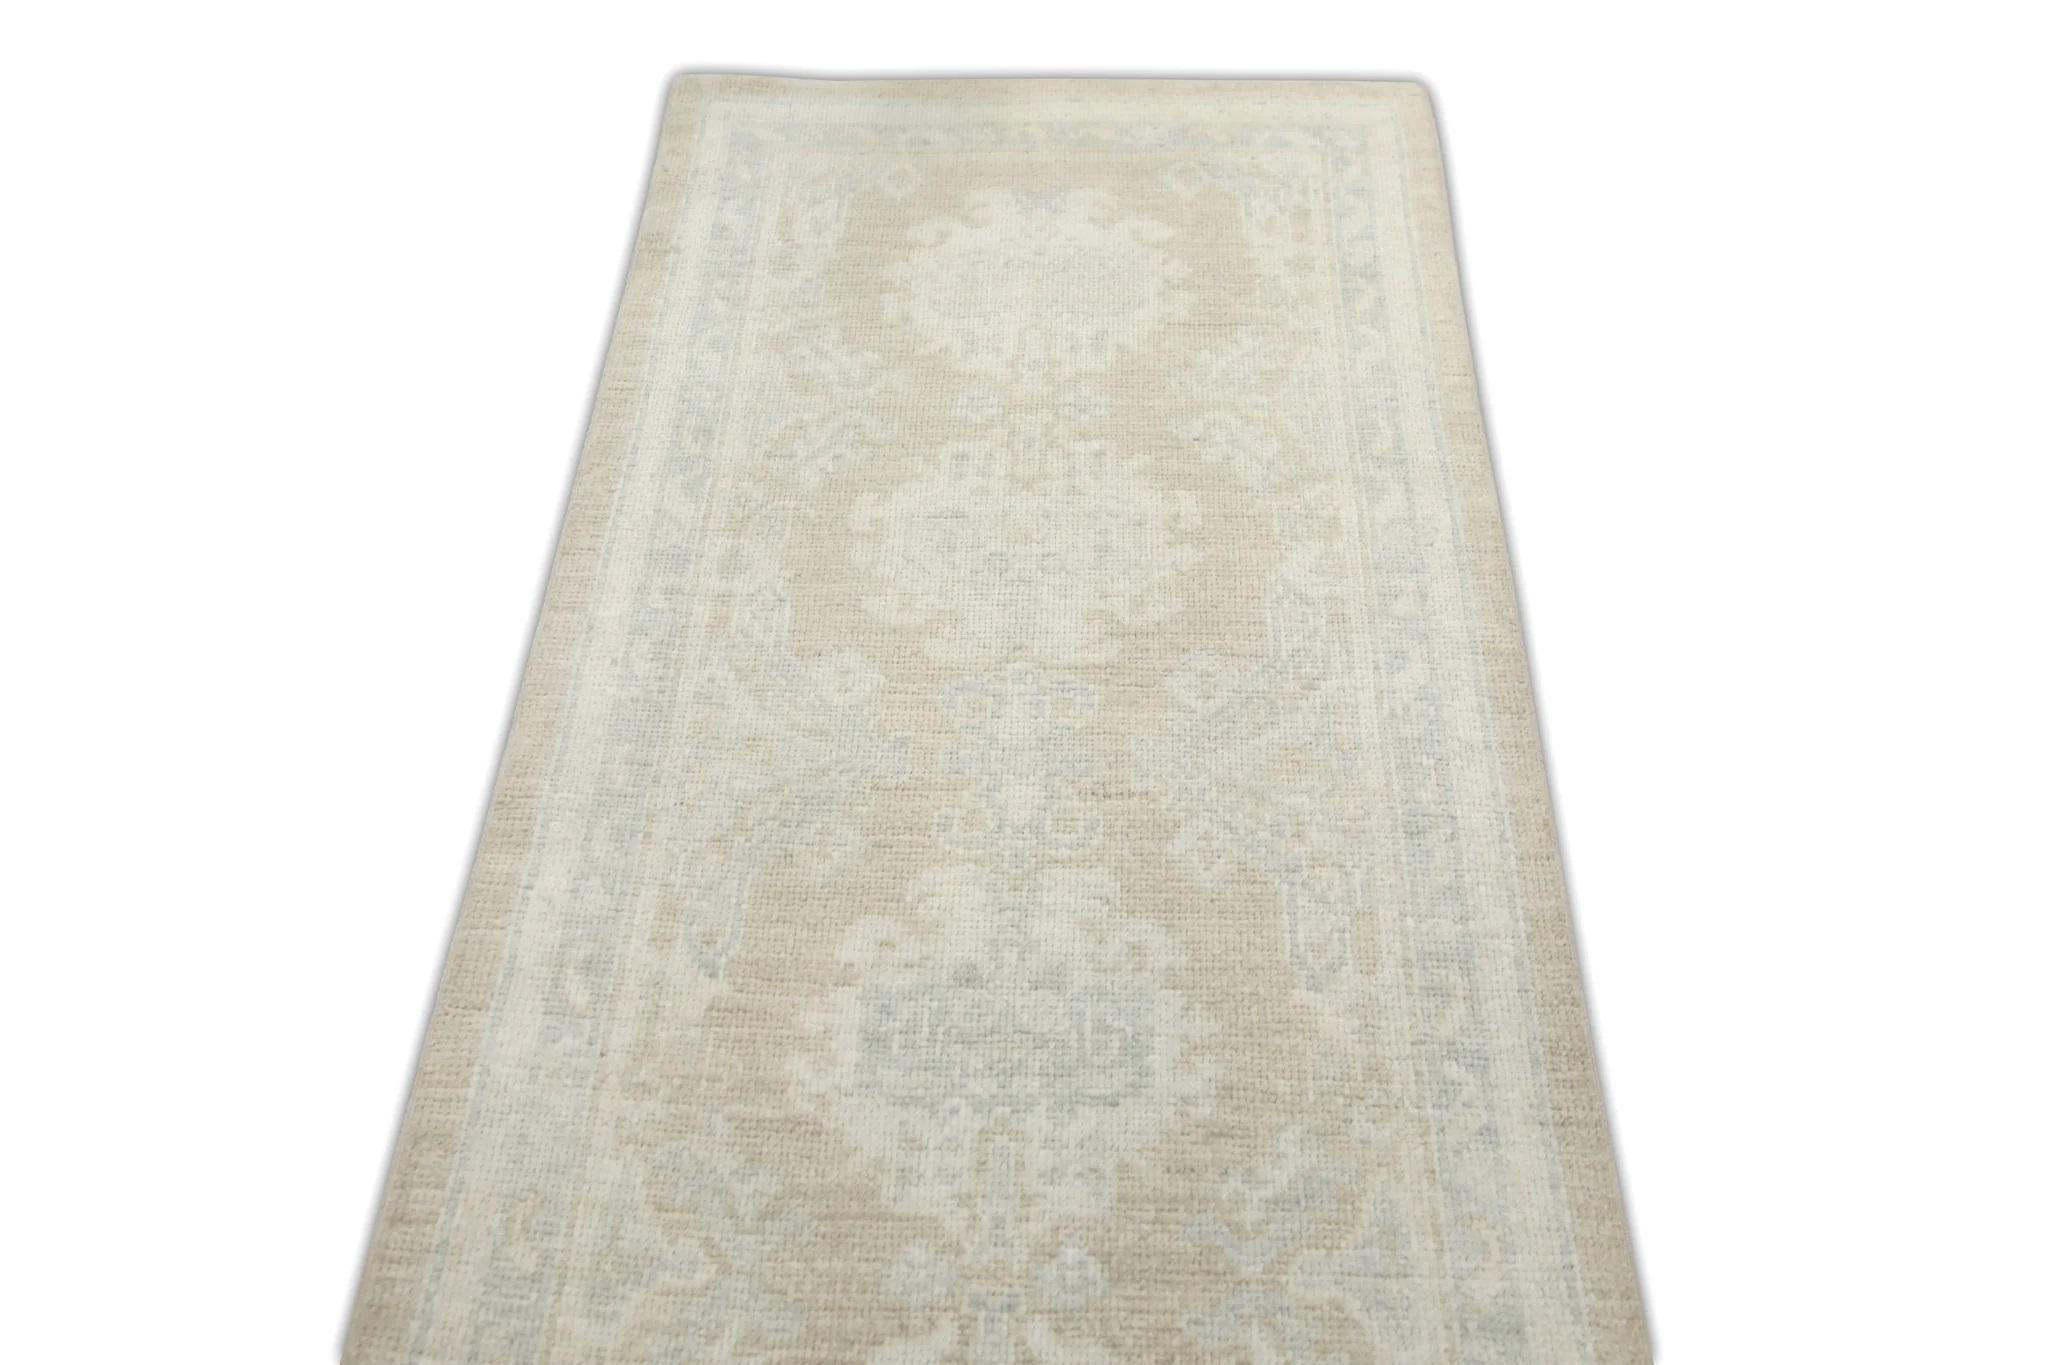 Contemporary Tan Handwoven Wool Turkish Oushak Runner in Floral Design 2'7